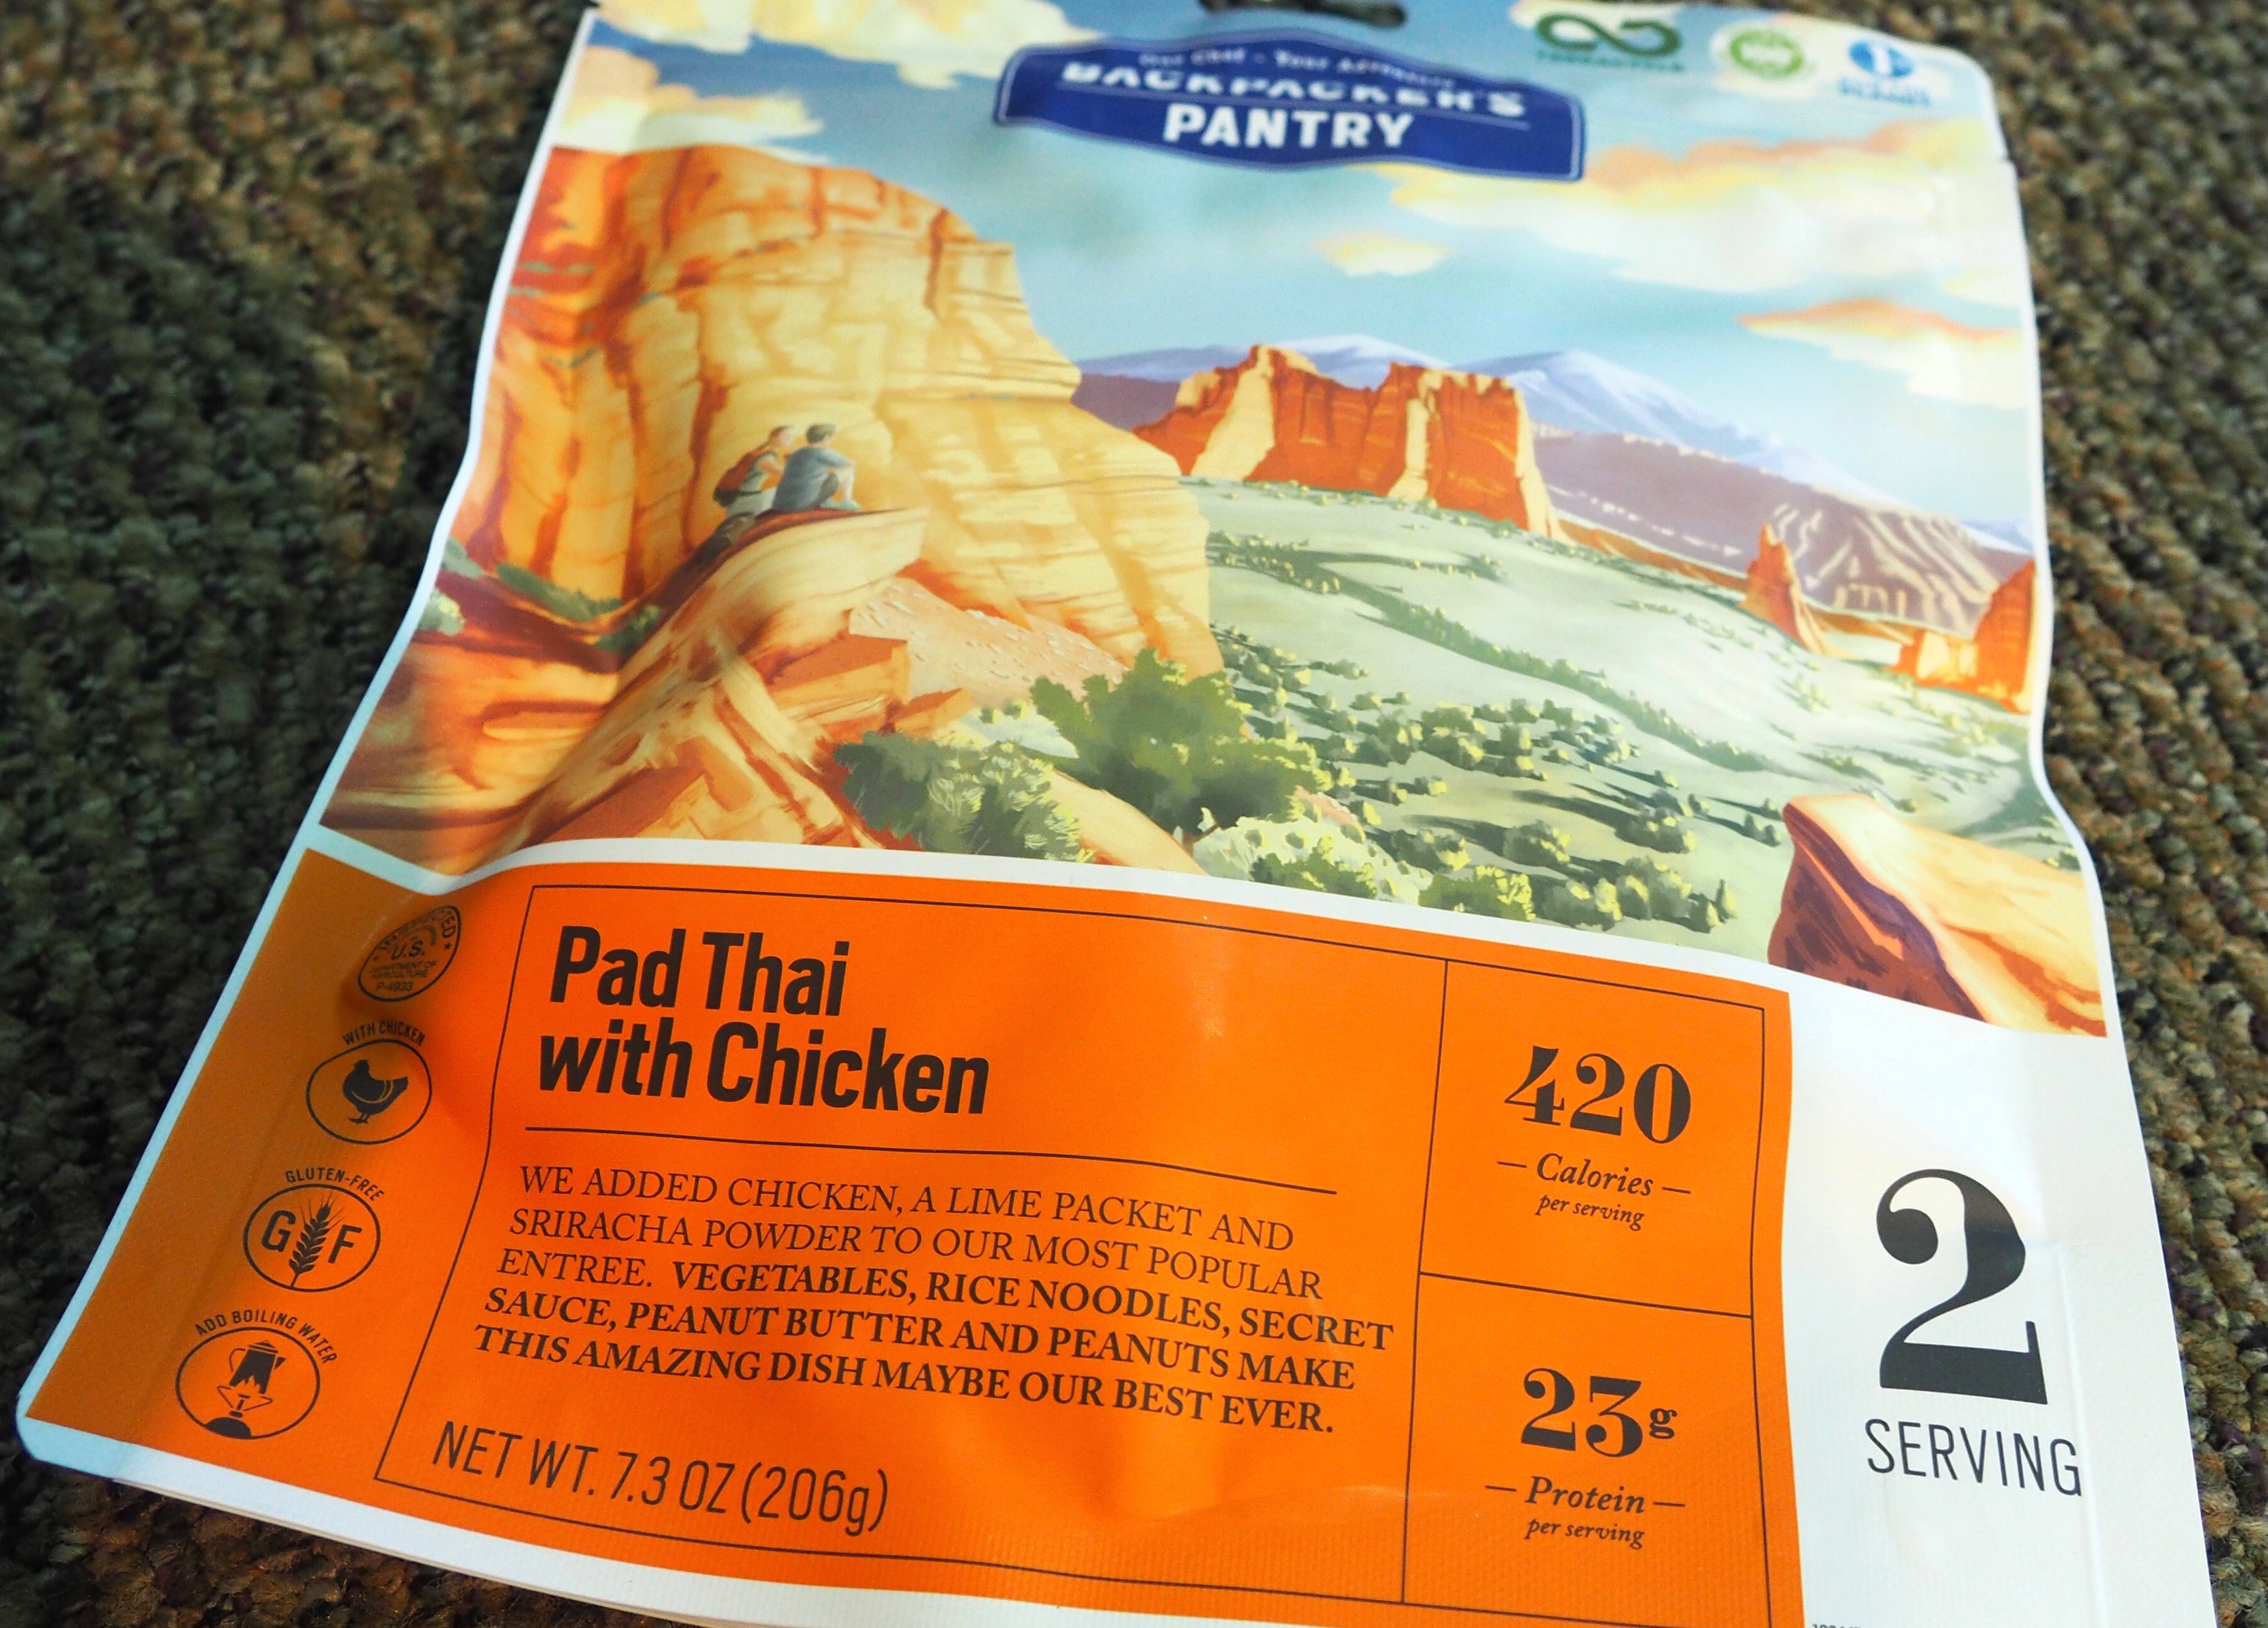 Backpacker's Pantry Freeze Dried and Dehydrated Food